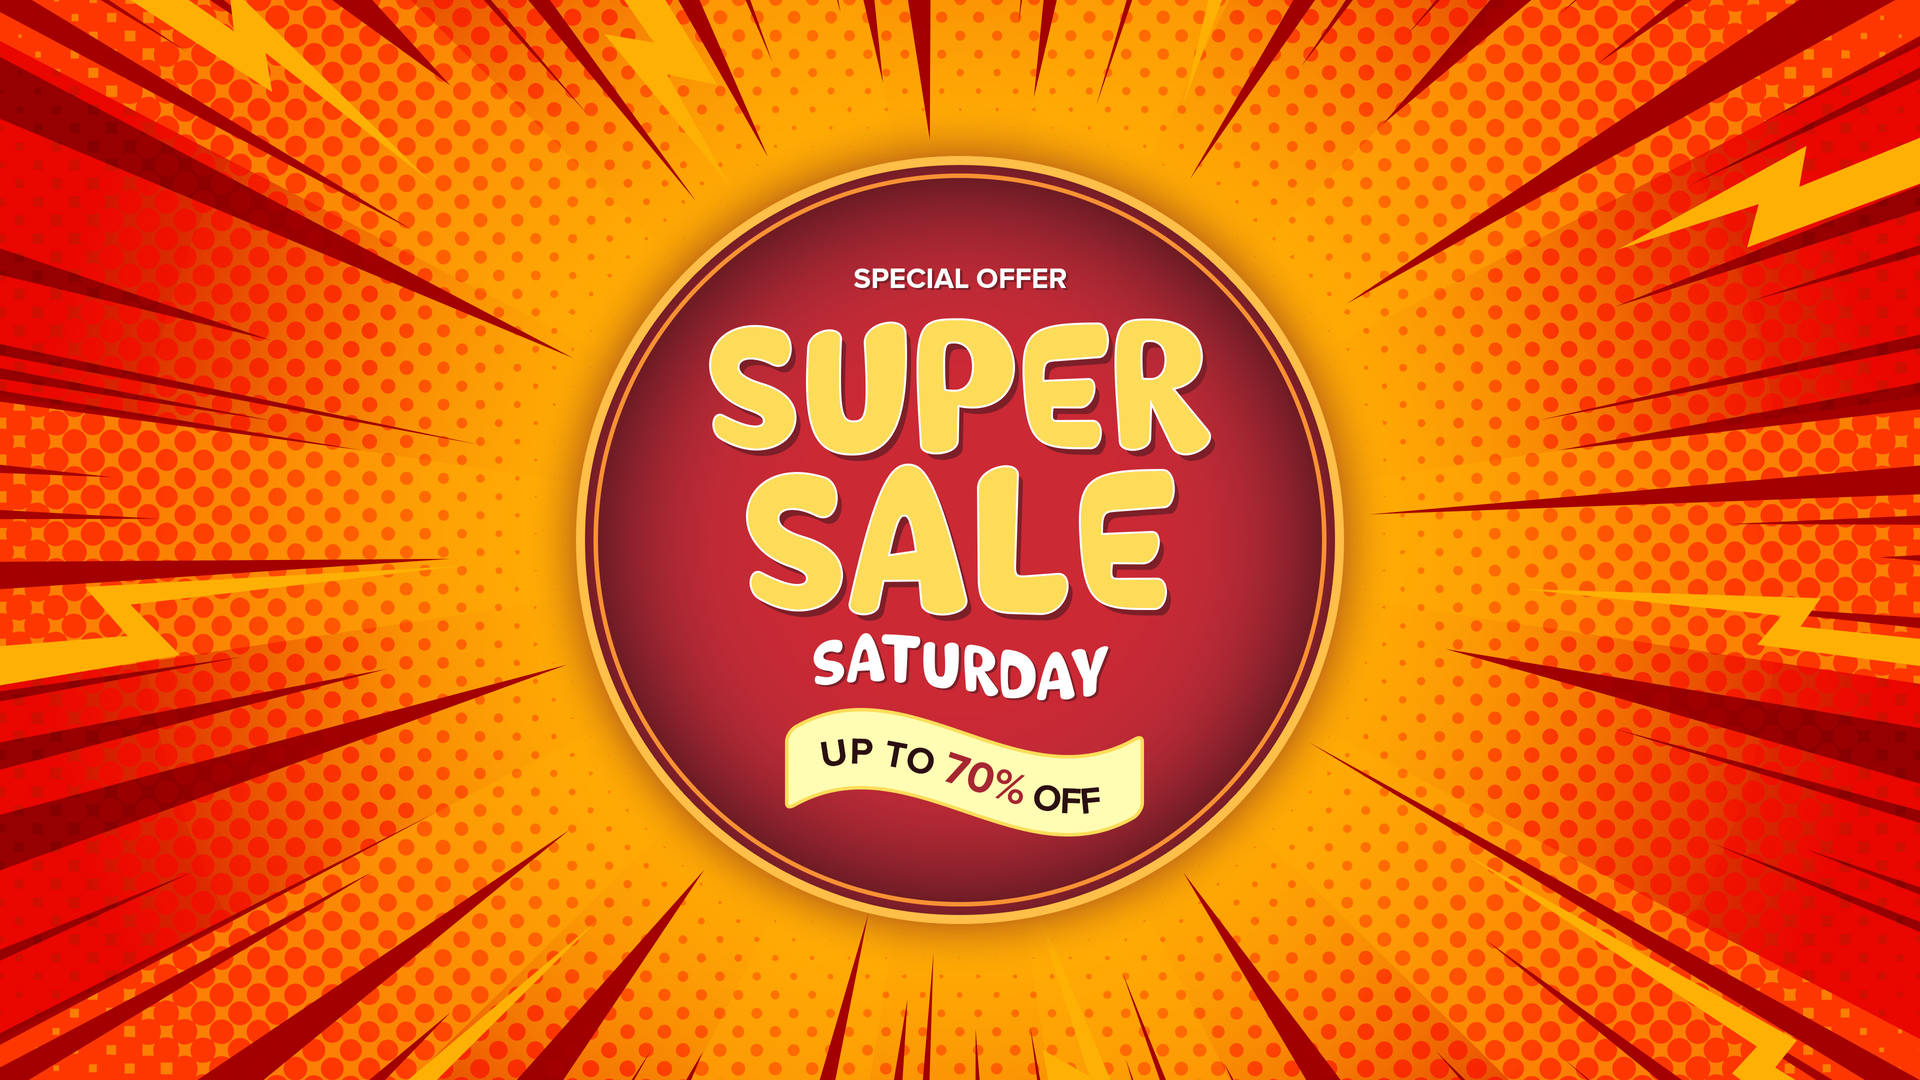 Exciting Super Saturday Sale In Bold Red And Gold